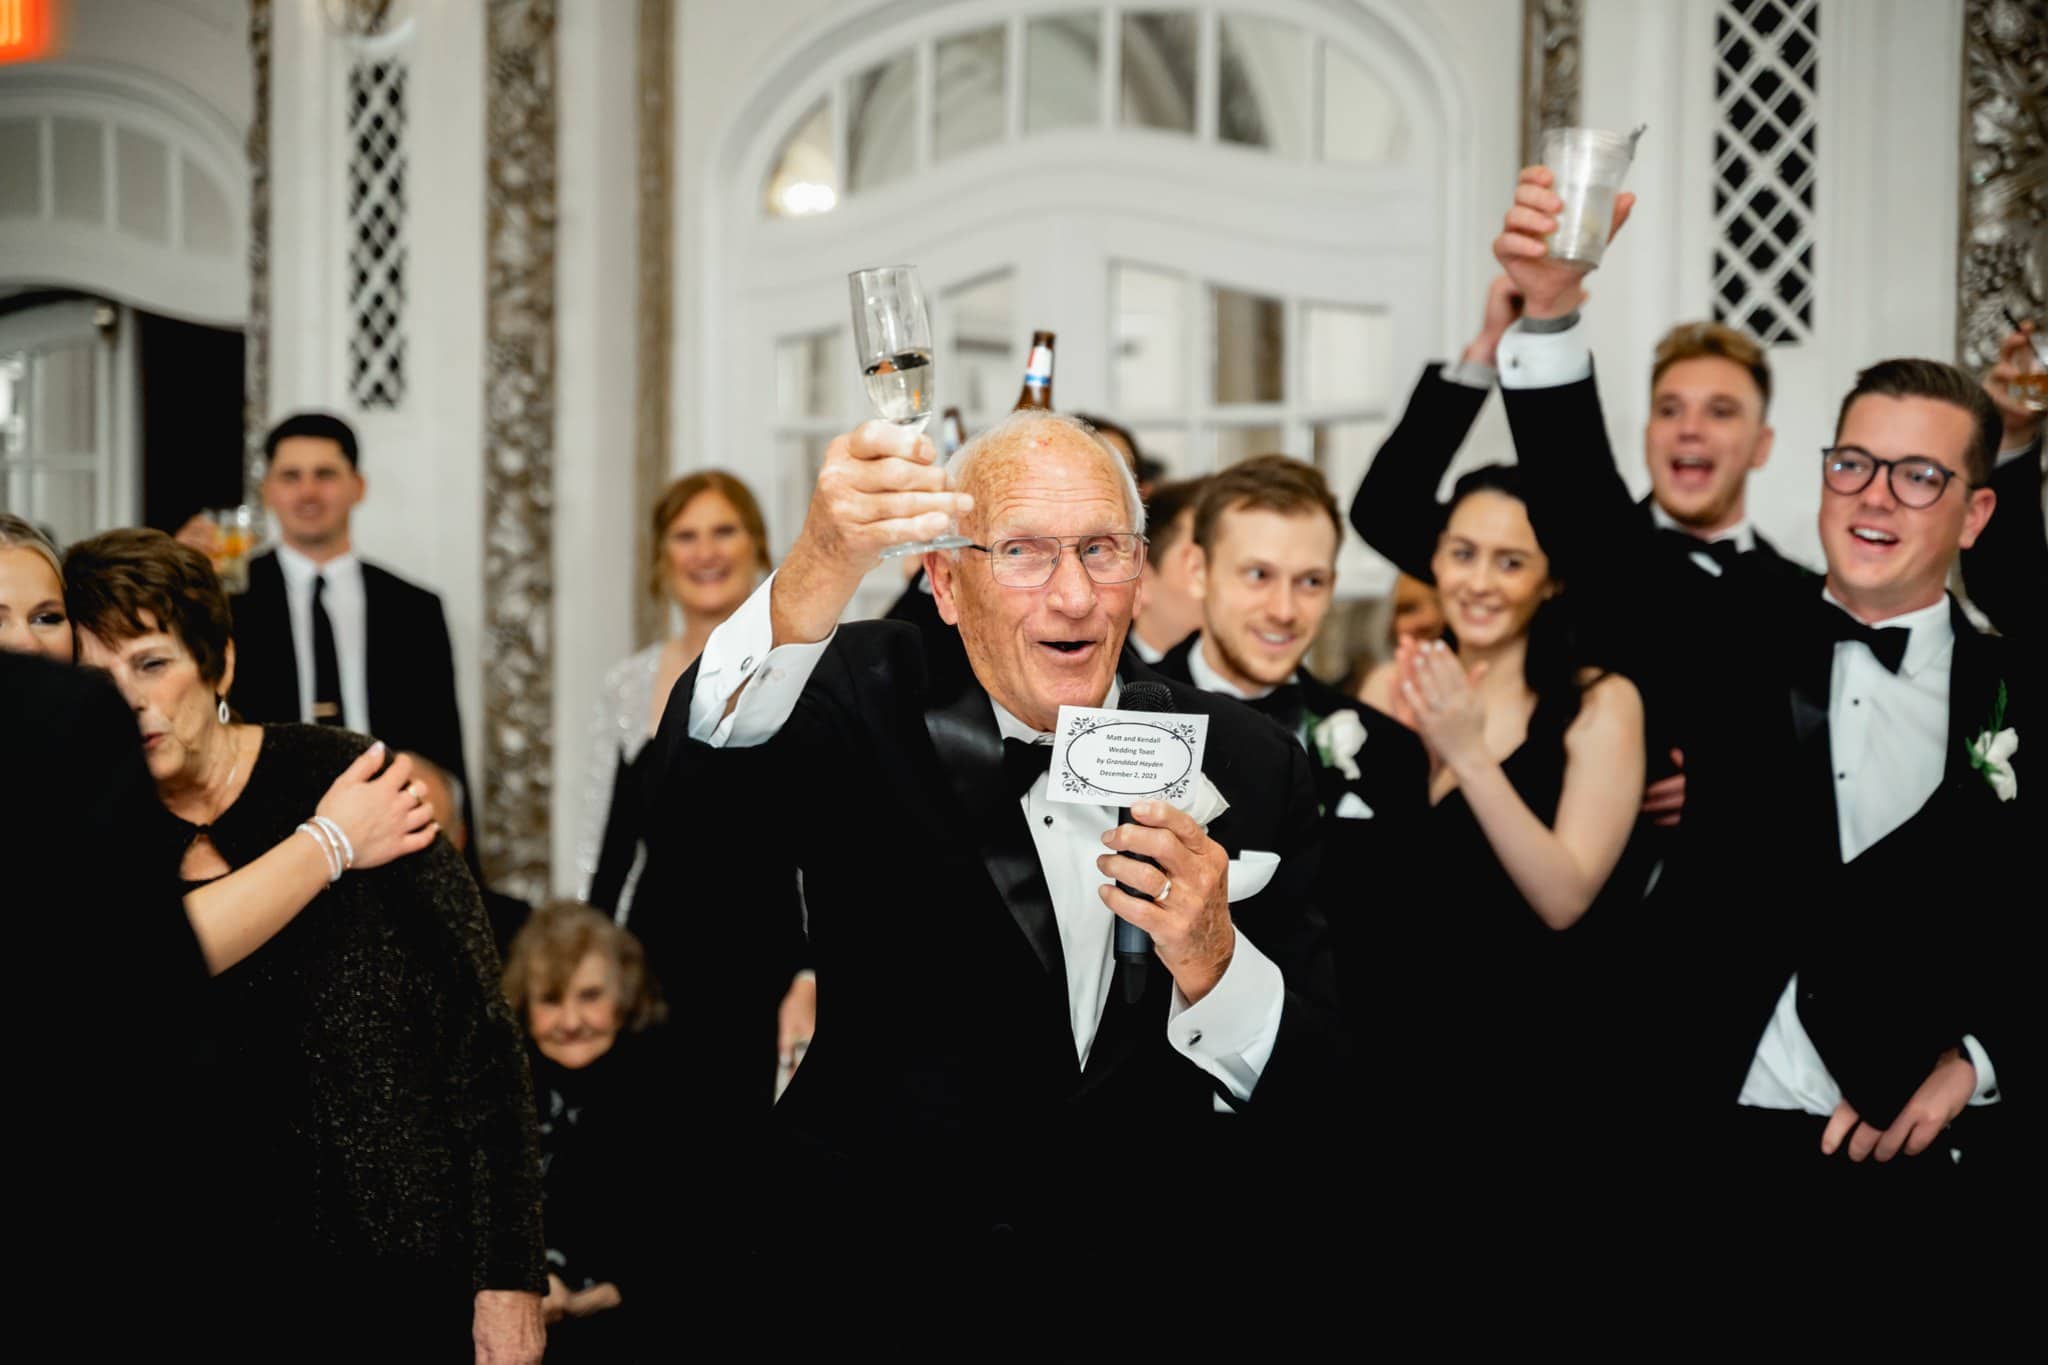 grandfather giving toast at wedding